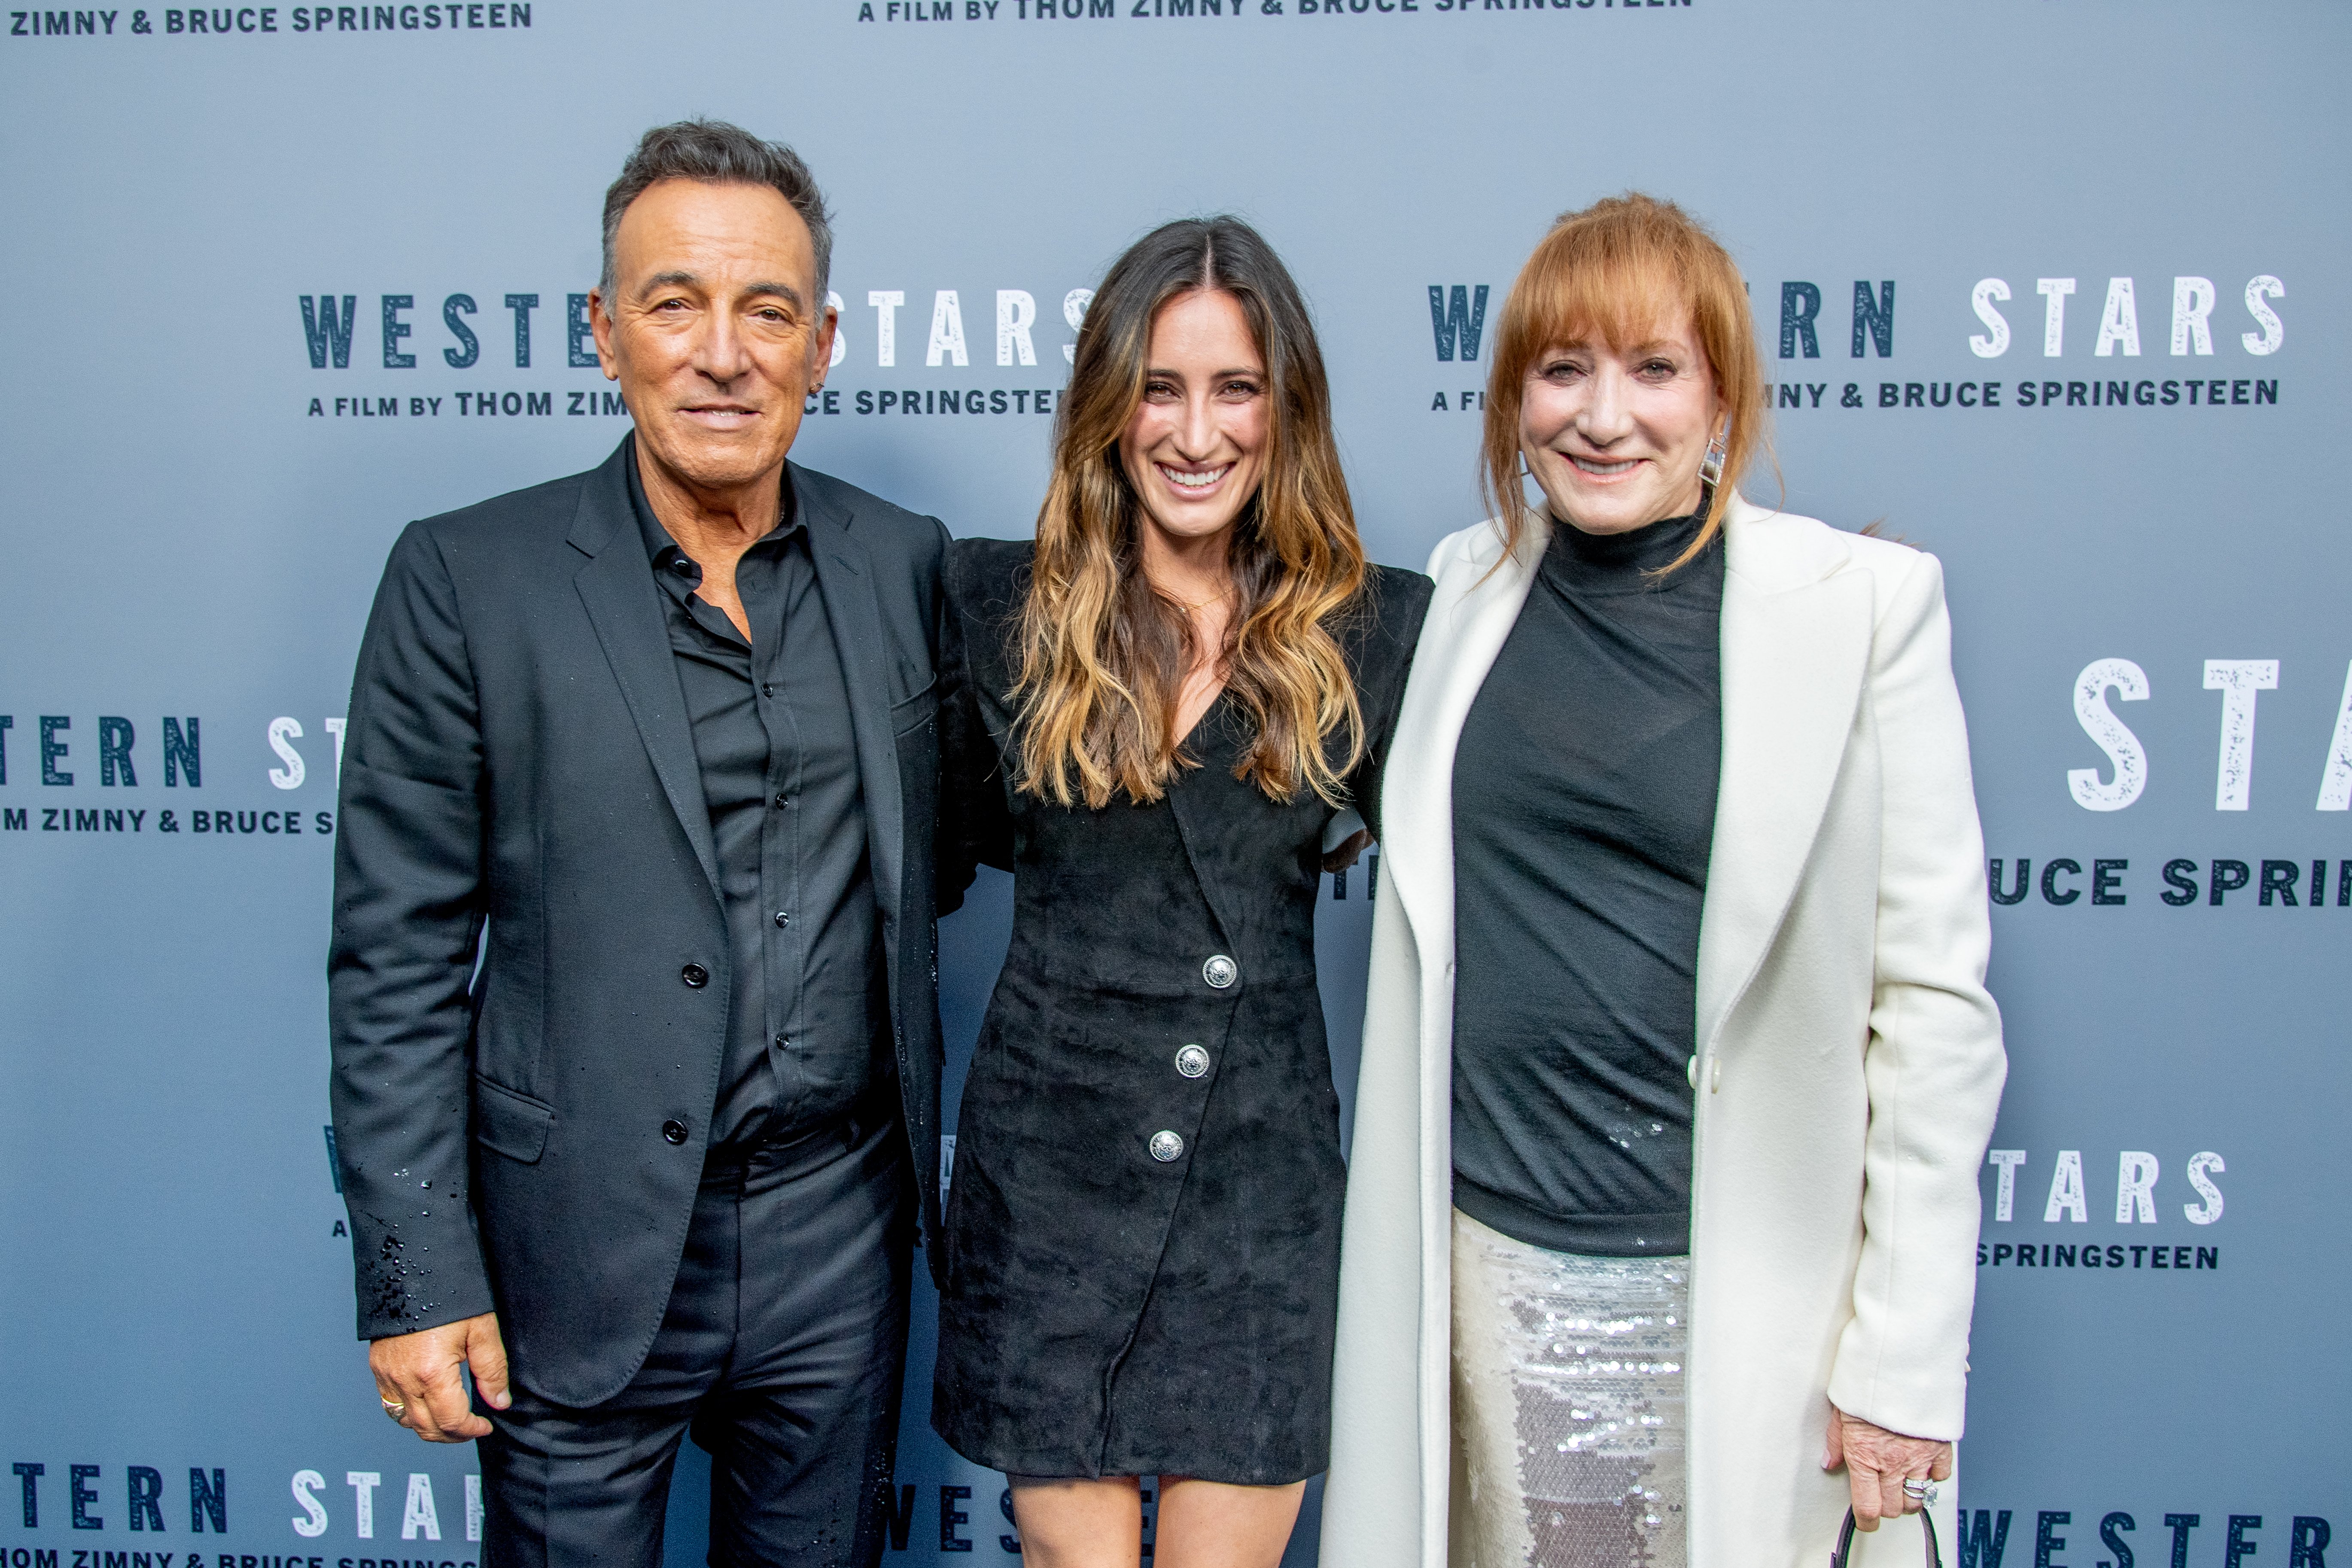 Bruce Springsteen pictured with his daughter, Jessica Springsteen and his wife, Patti Scialfa during the "Western Stars" New York screening at Metrograph on October 16, 2019 in New York City. | Source: Getty Images